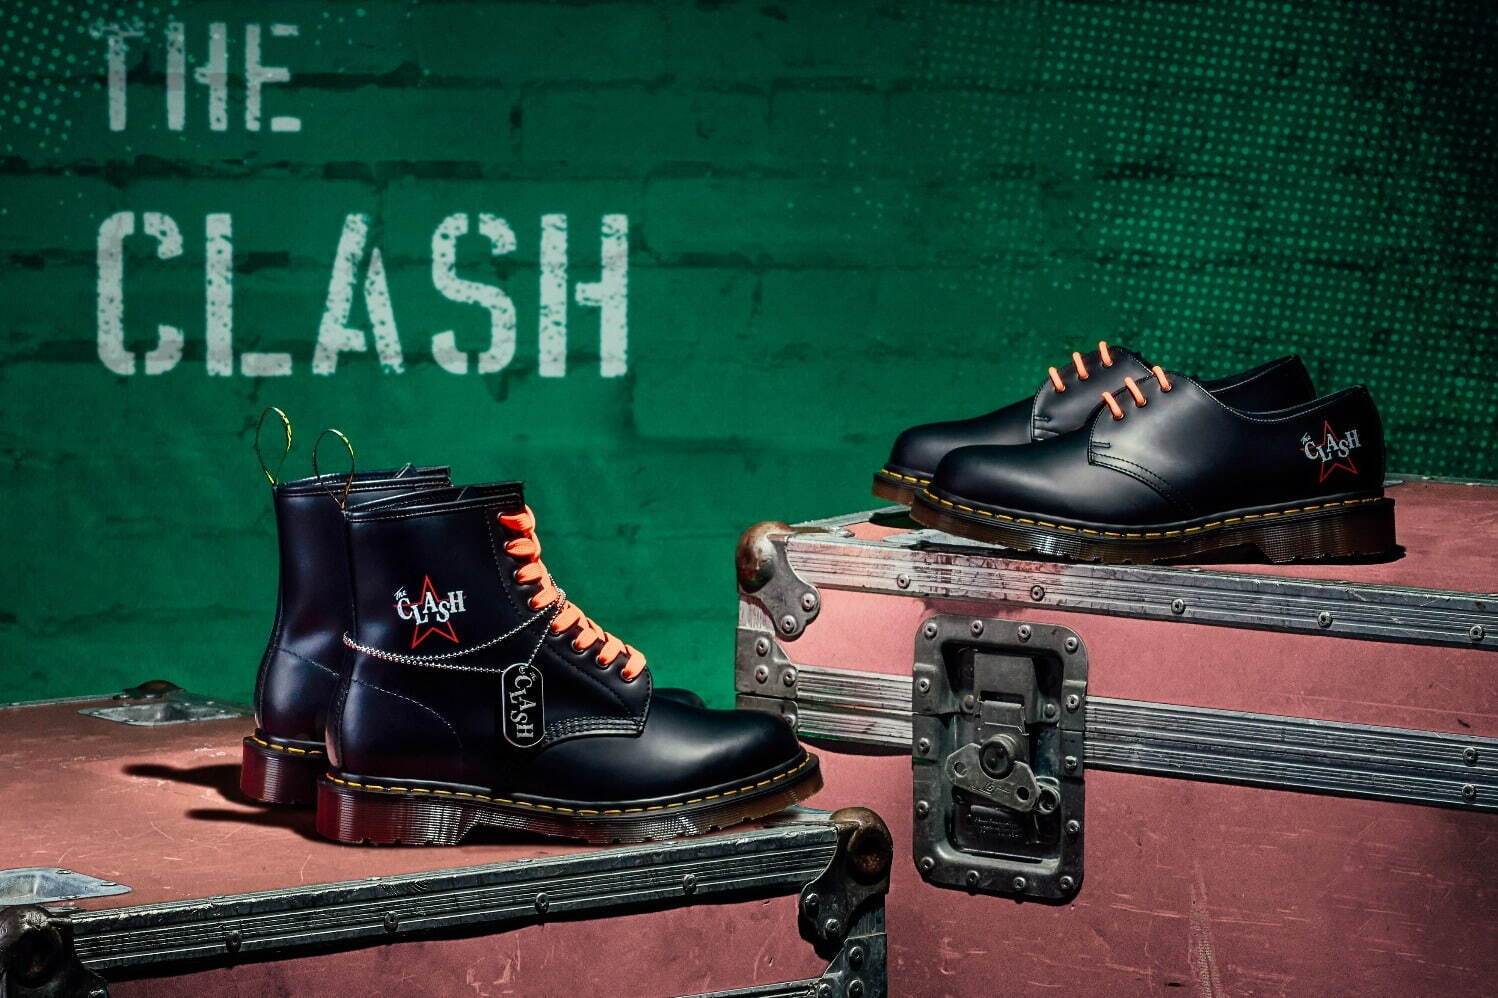 MADE IN ENGLAND 1460 THE CLASH 46,200円、MADE IN ENGLAND 1461 THE CLASH 40,700円
※一部店舗・公式オンラインショップ限定